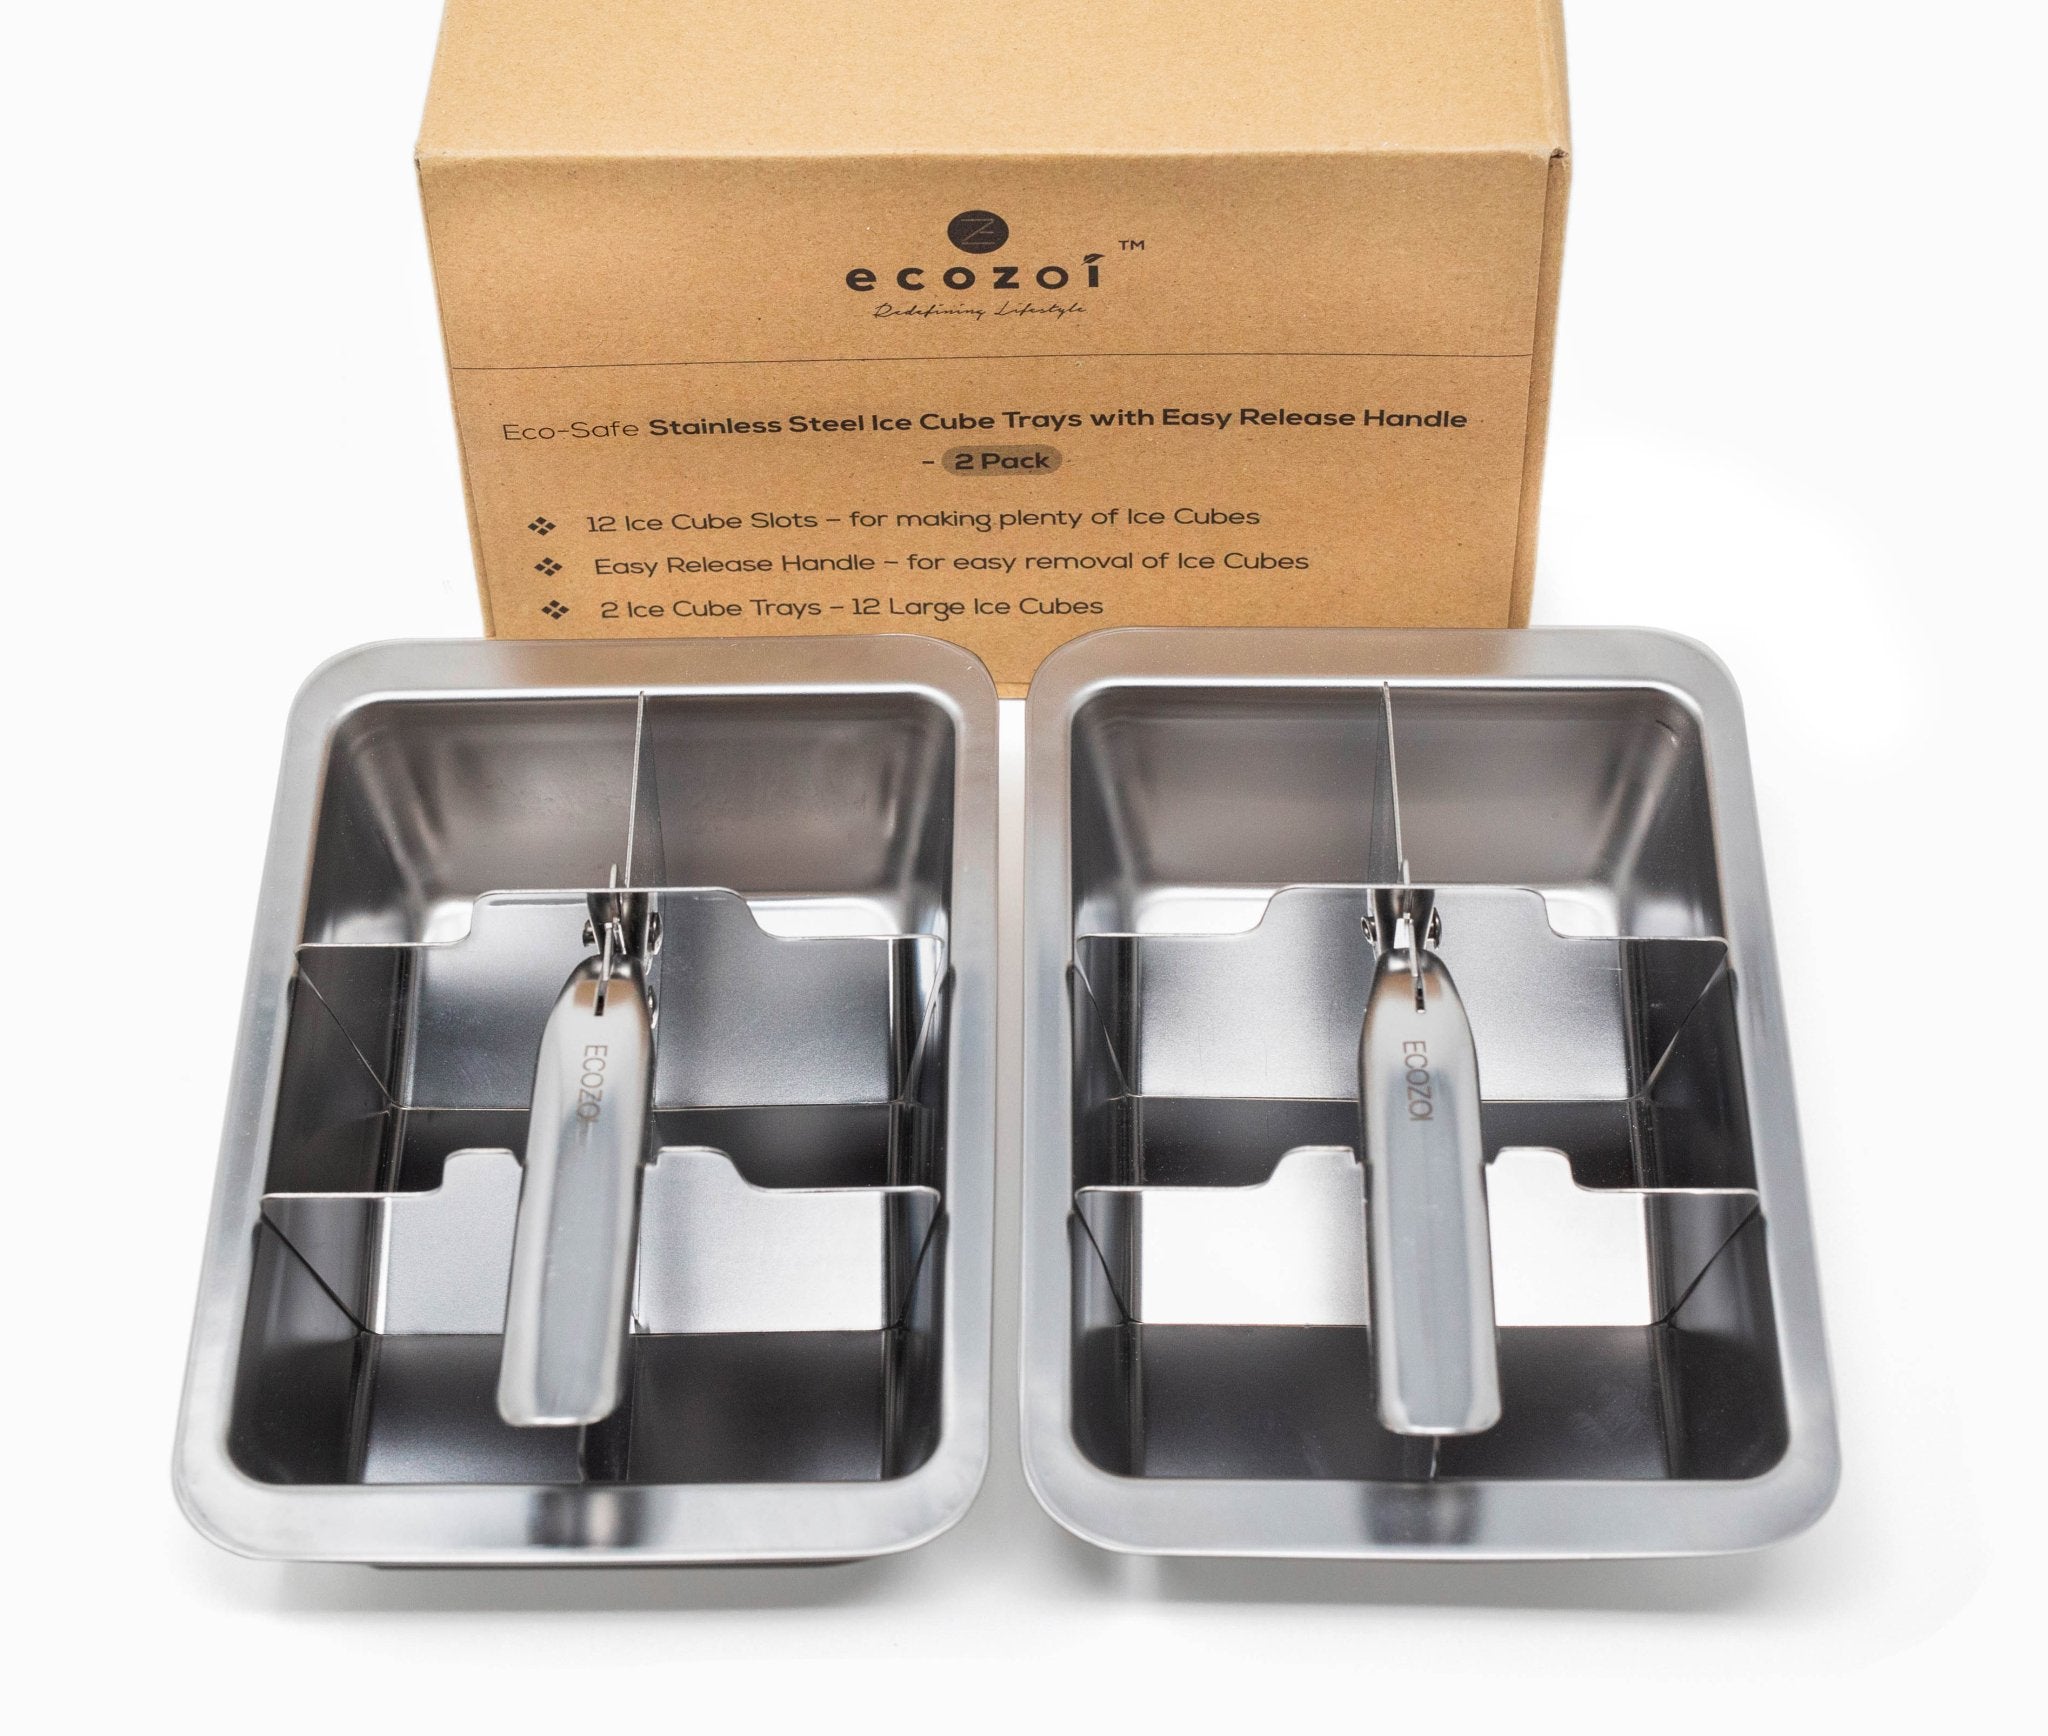 https://farm2.me/cdn/shop/products/ecozoi-ecozoi-stainless-steel-ice-cube-trays-with-easy-release-2-pack-12-large-cubes-by-ecozoi-delivery-near-me-in-farm2me-url-258355.jpg?v=1699761029